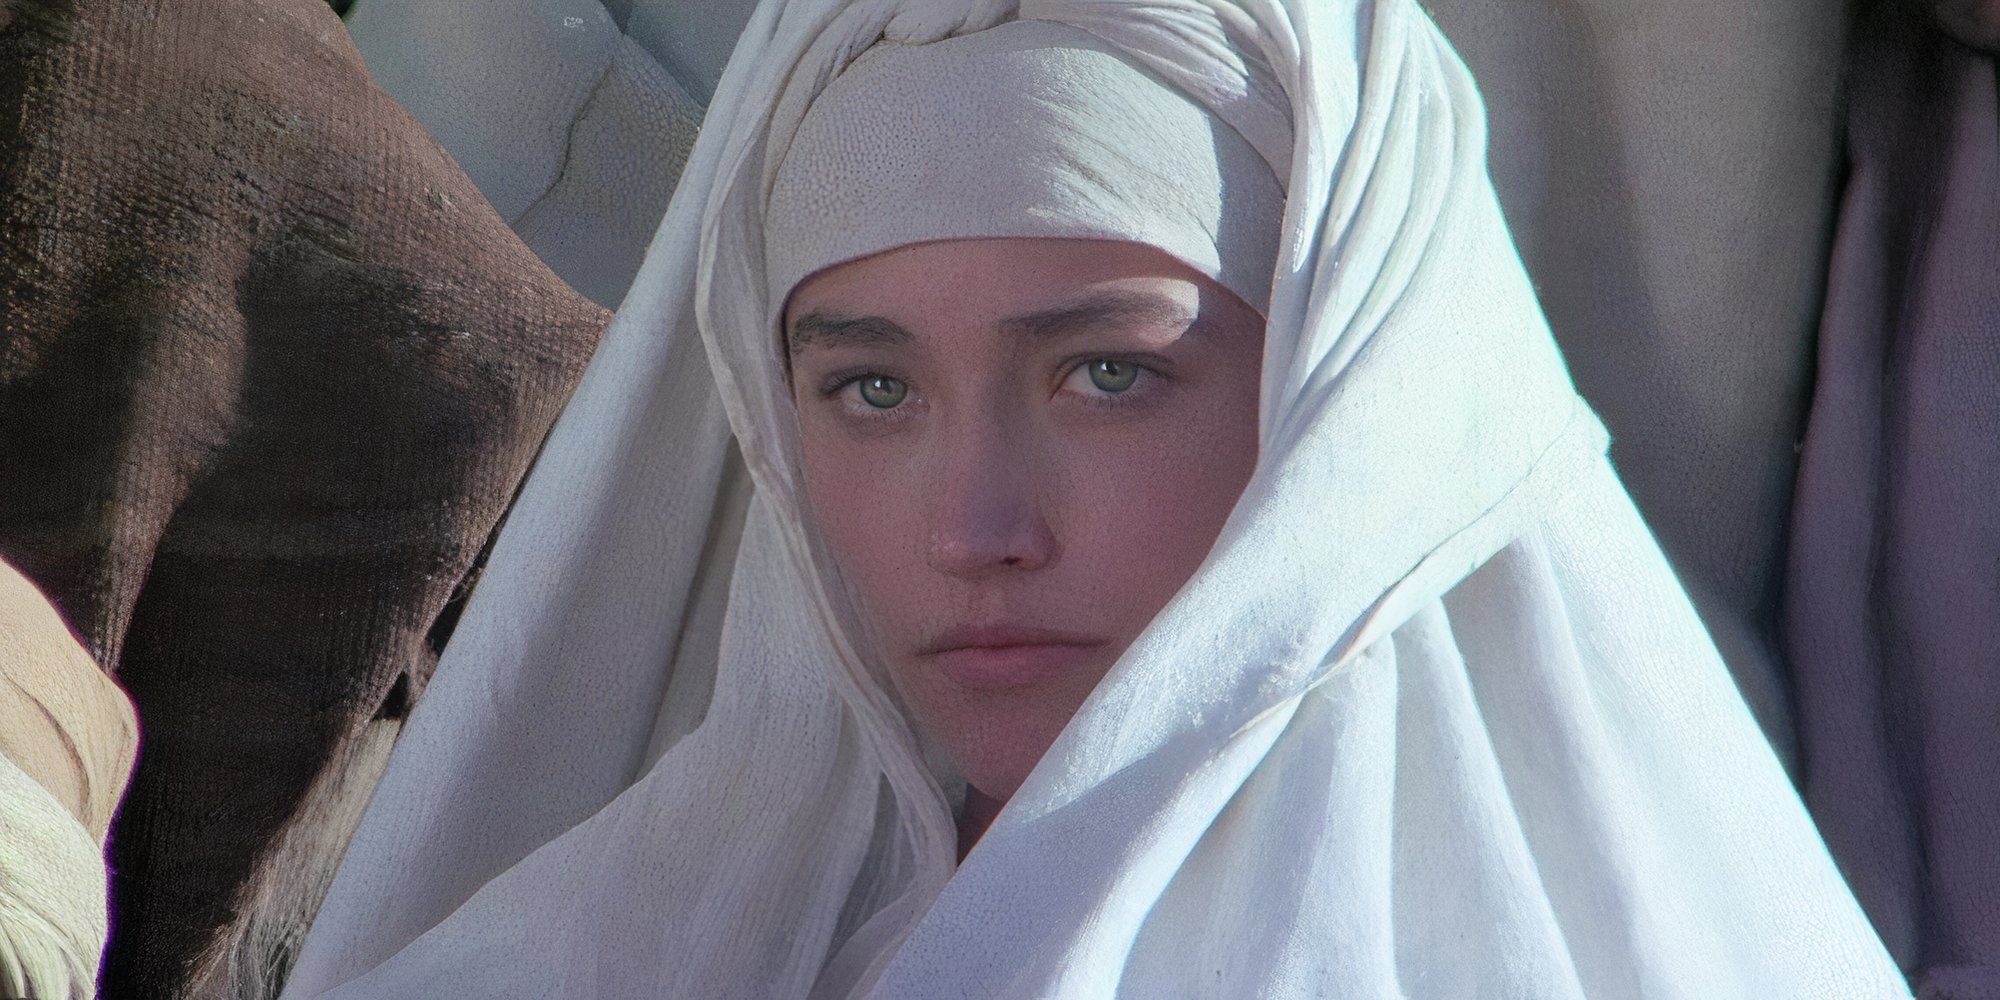 Olivia Hussey as Mary in Jesus of Nazareth looking sad.